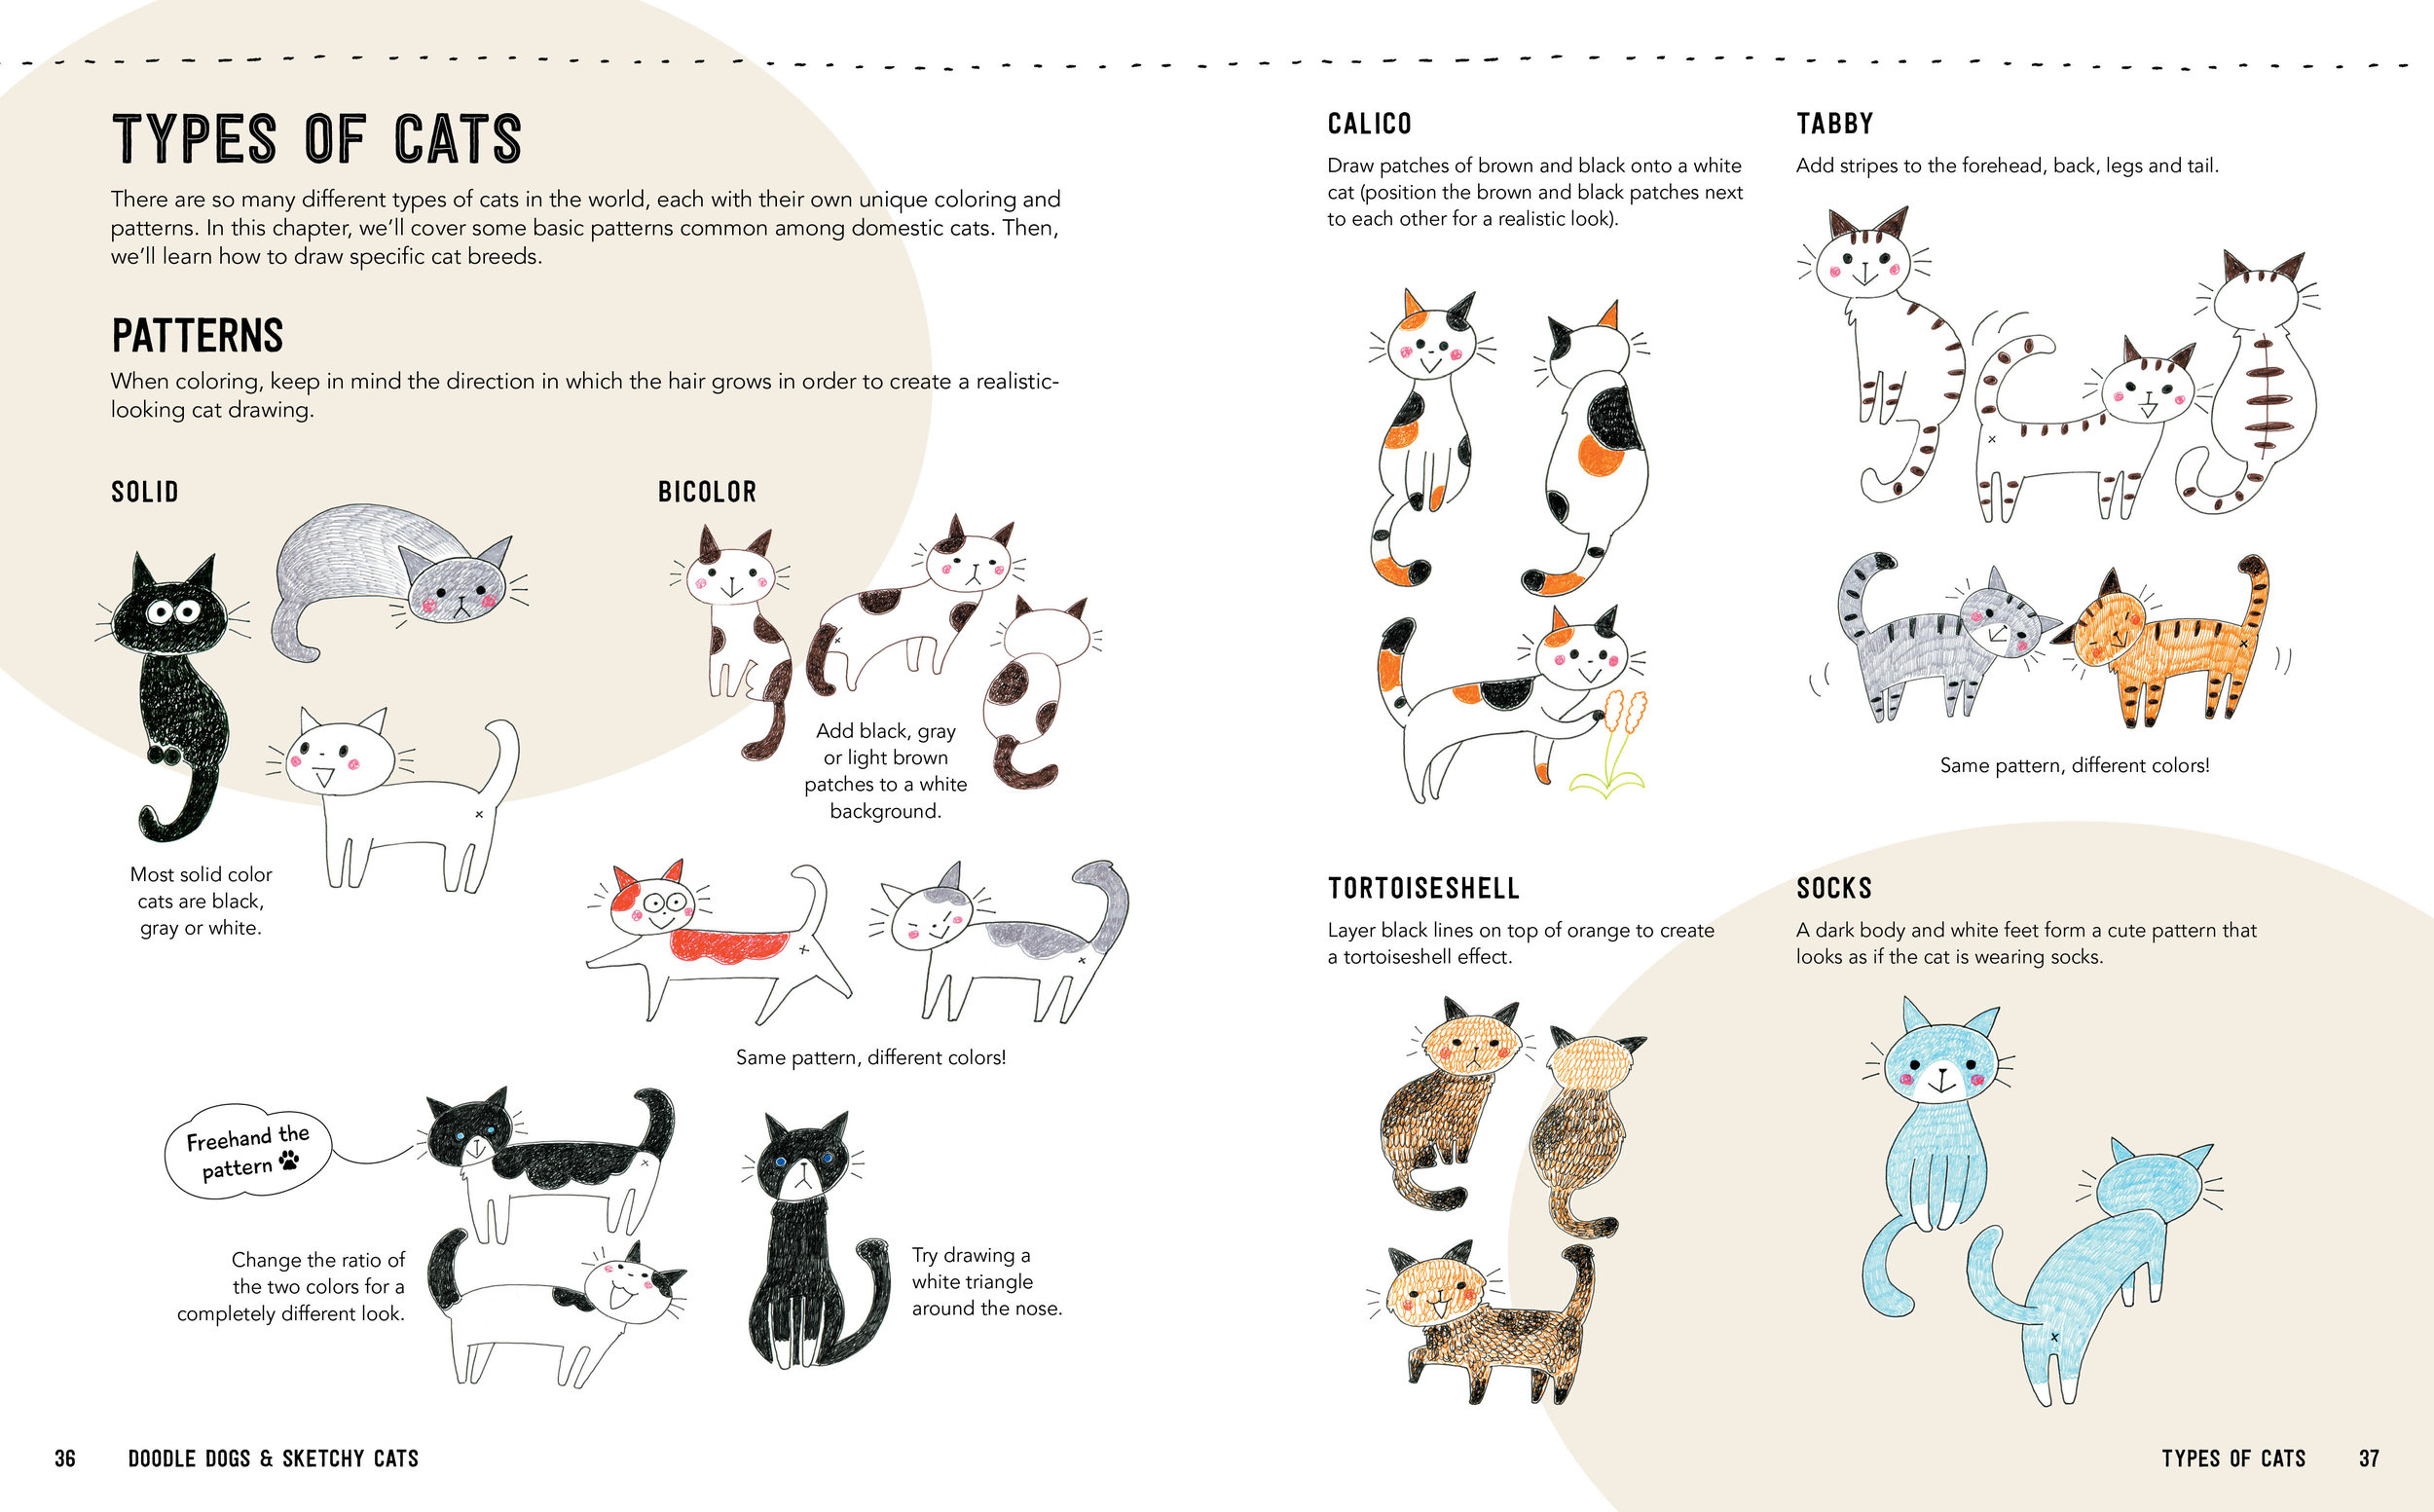 Doodle Dogs & Sketchy Cats 36.37.jpg